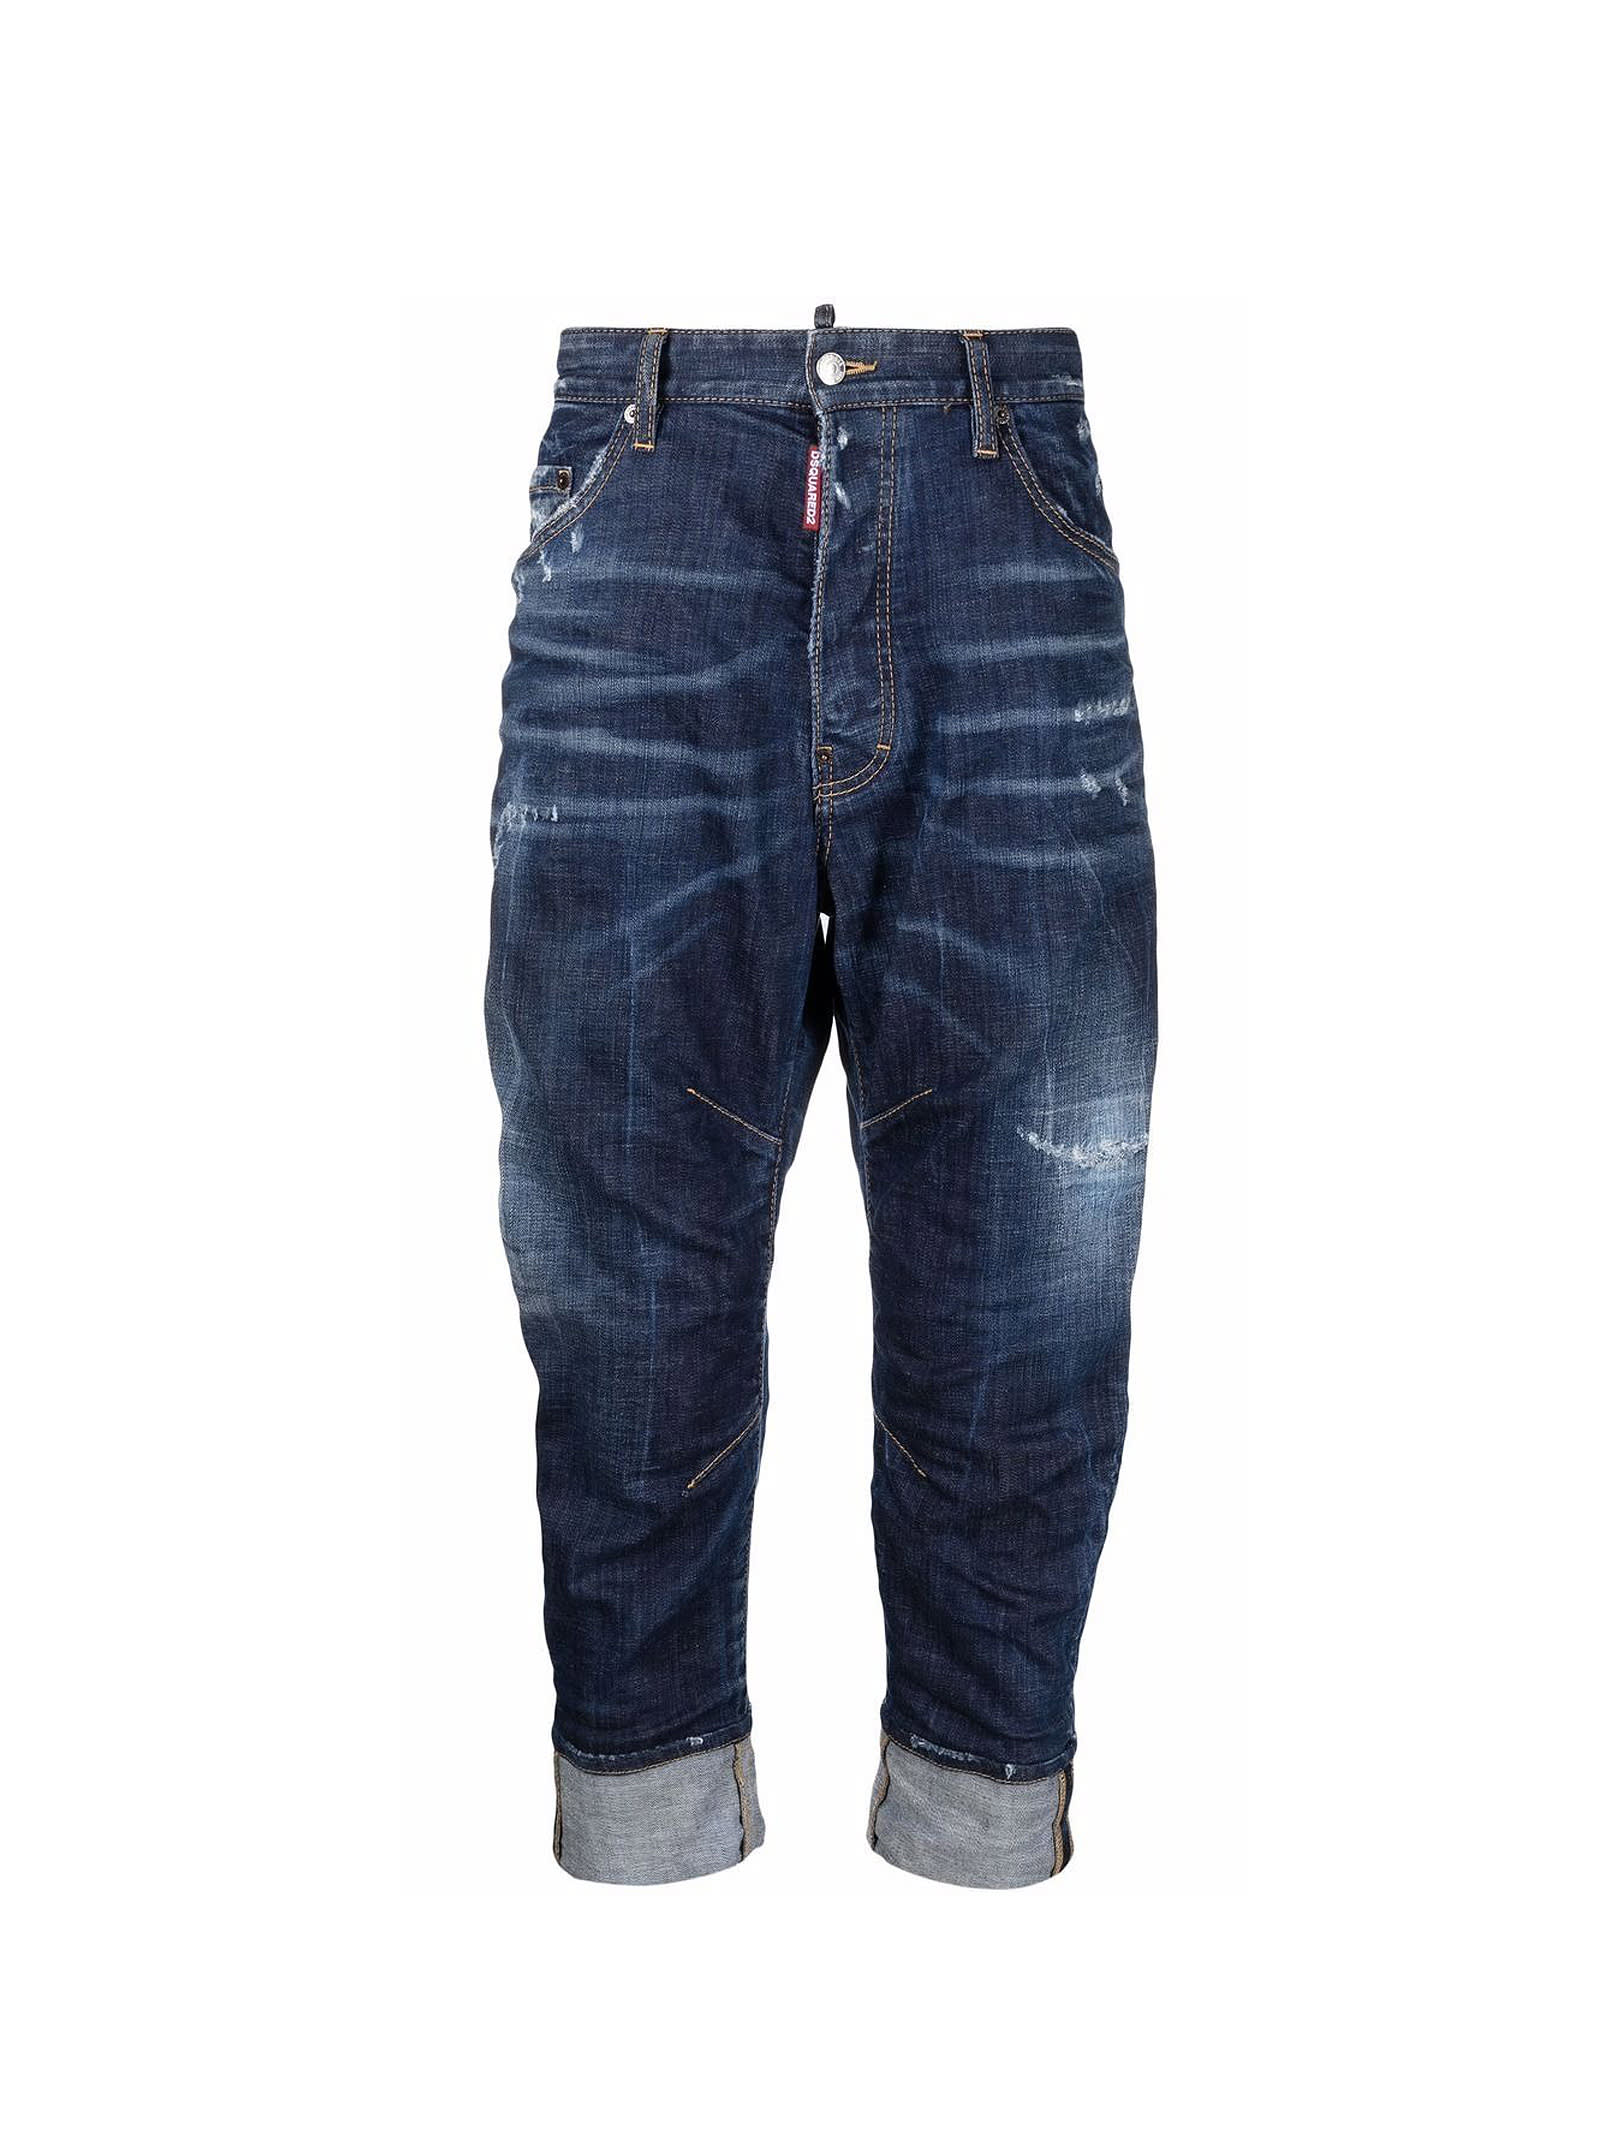 Dsquared2 Blue Navy Jeans